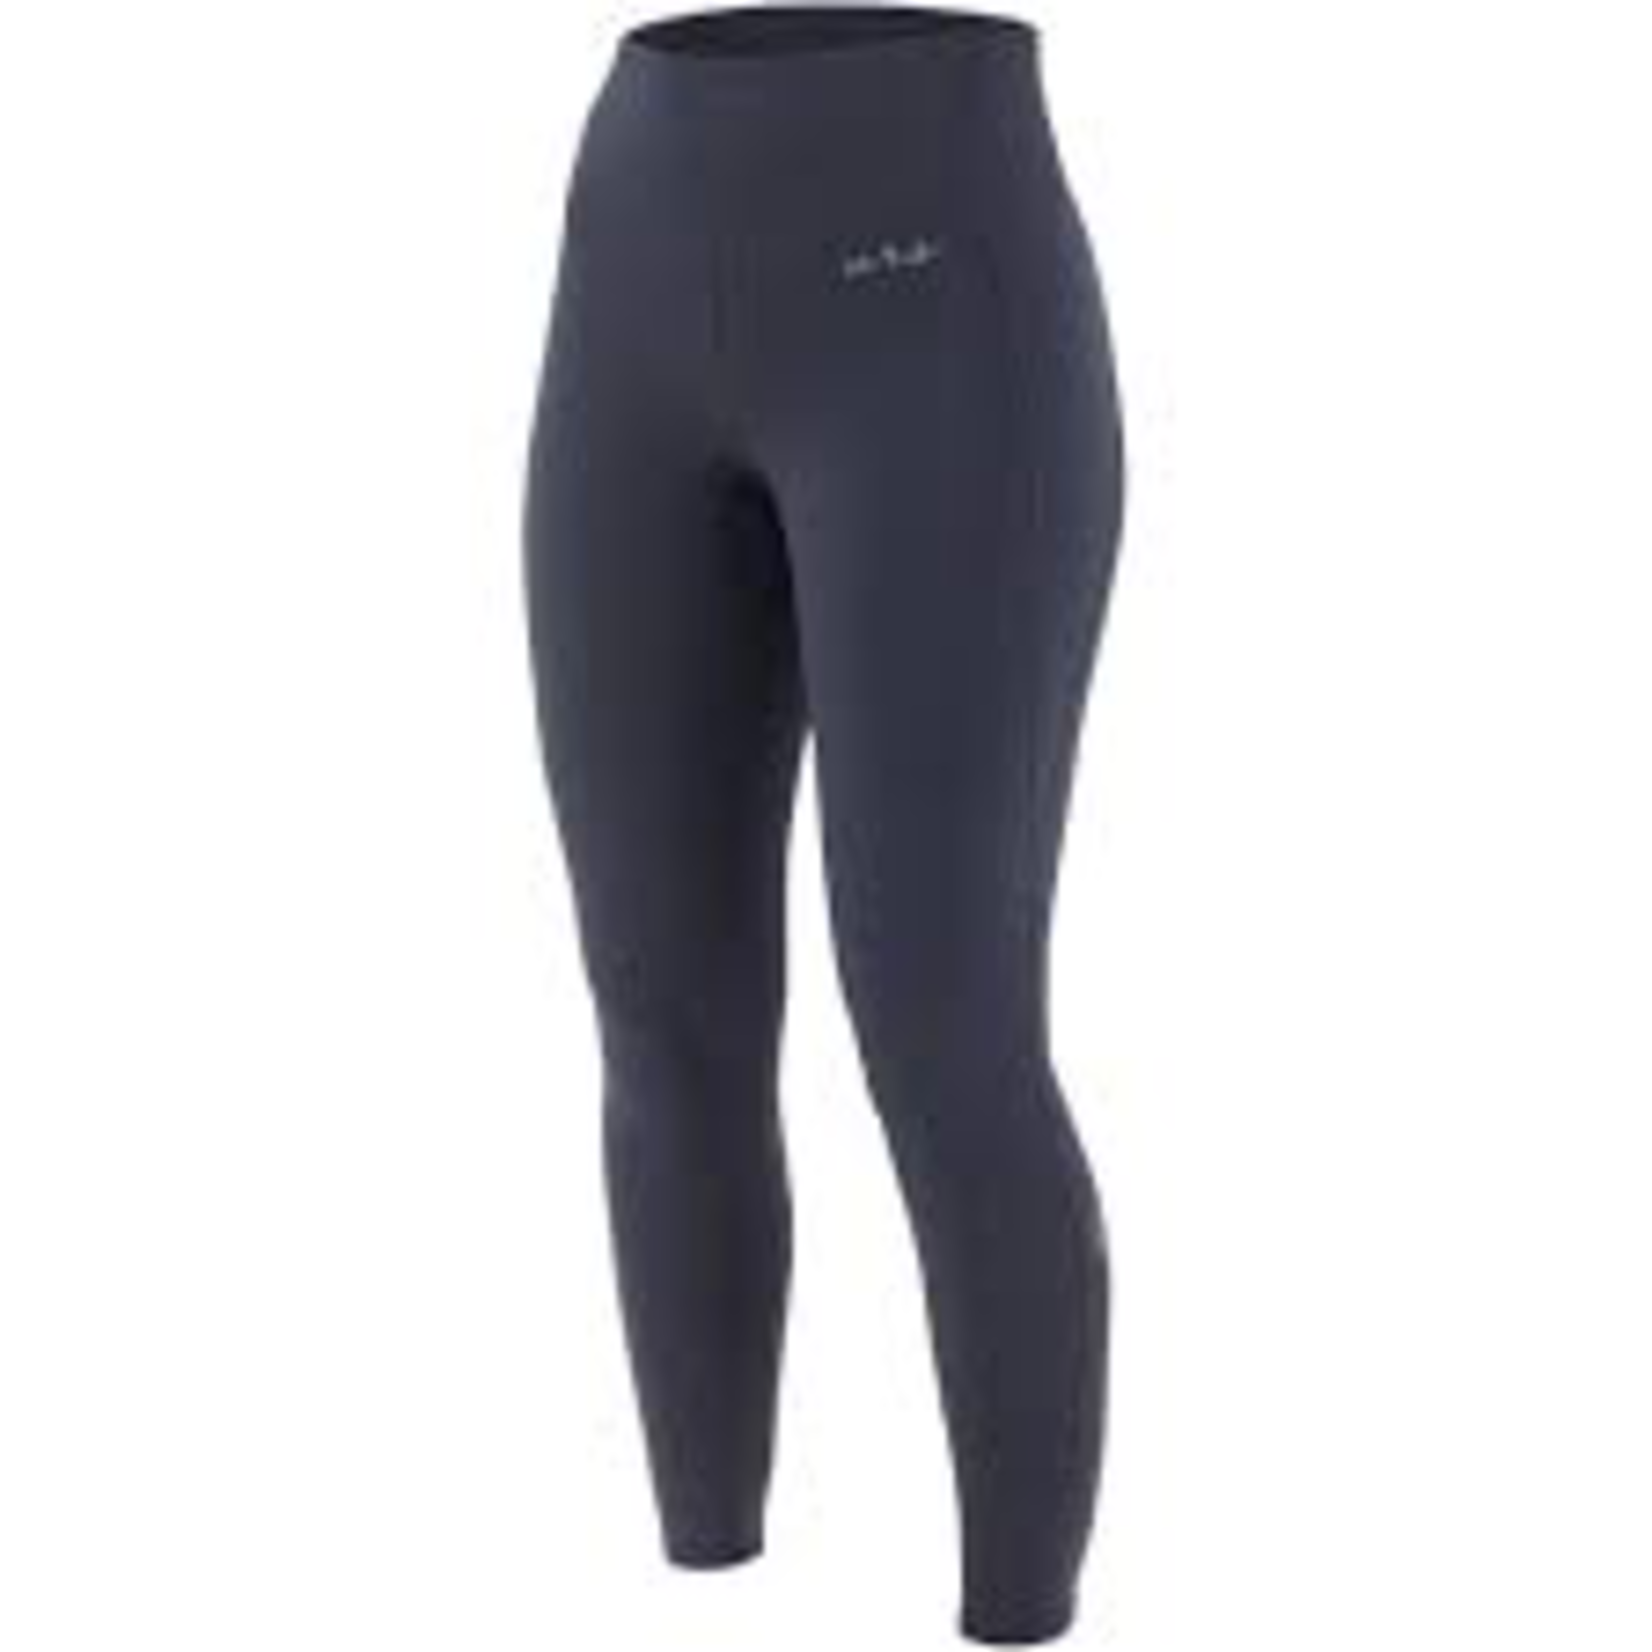 NRS NRS Women’s HydroSkin 1.5 Pant